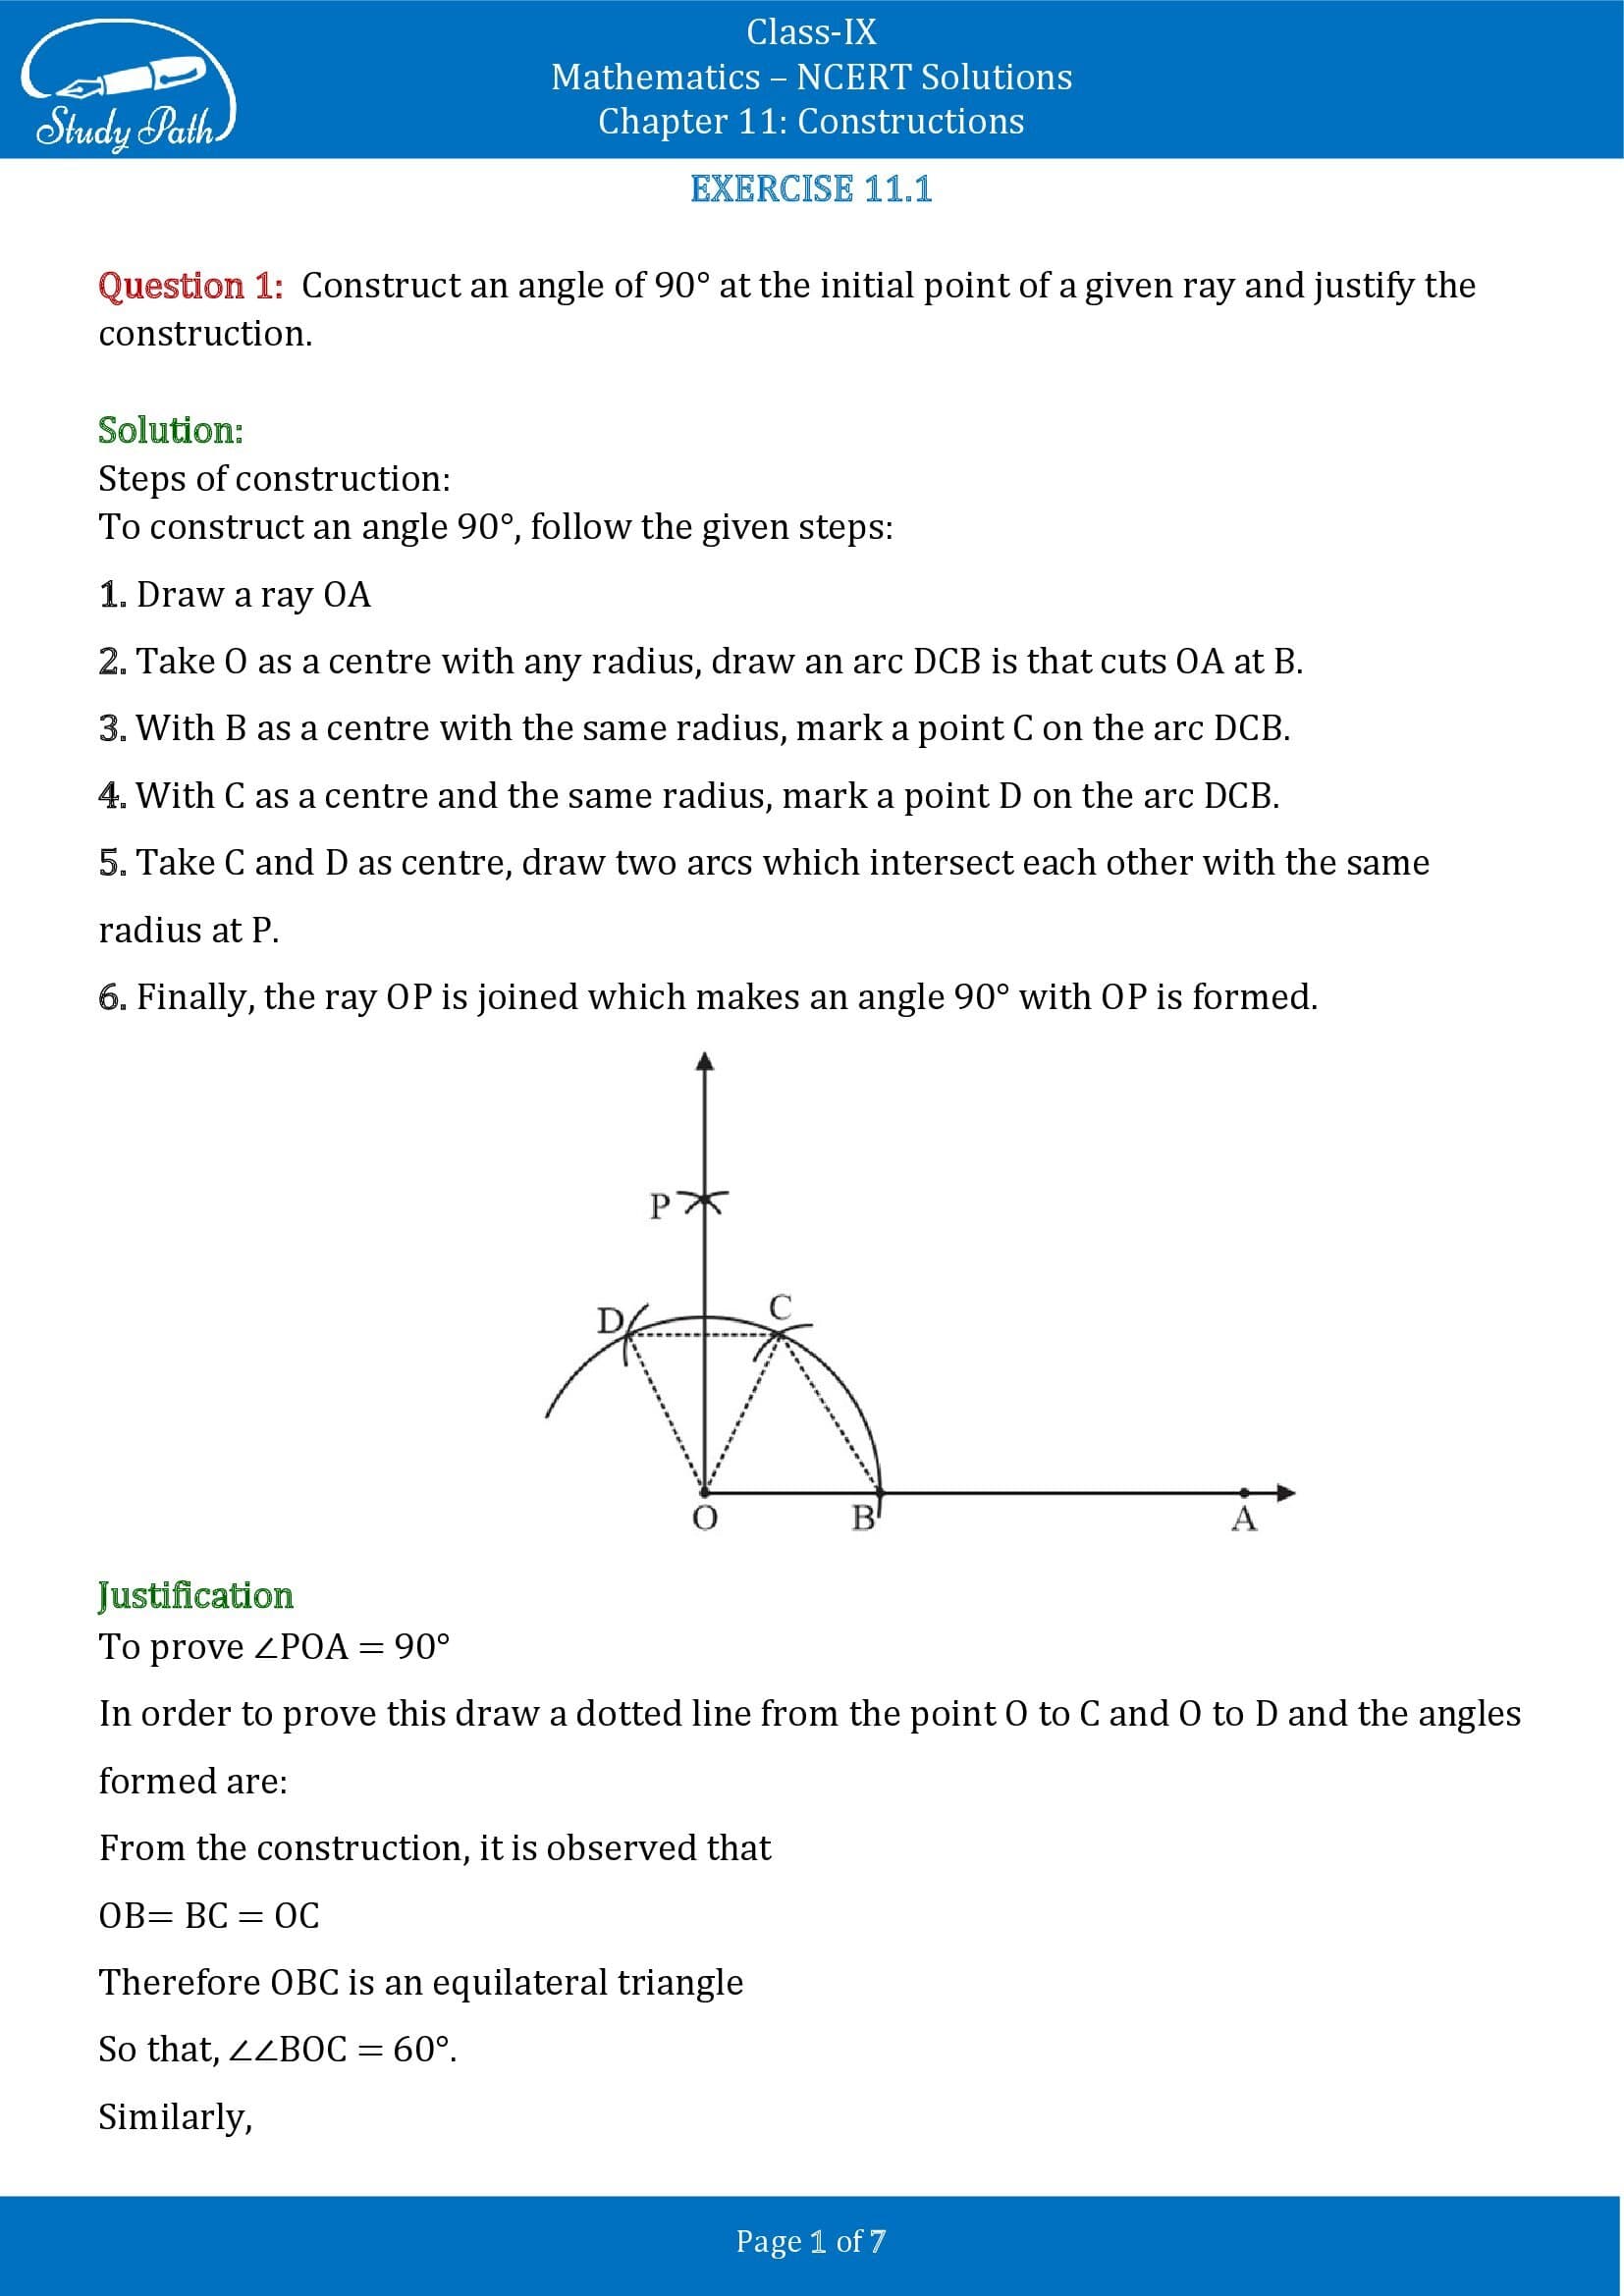 NCERT Solutions for Class 9 Maths Chapter 11 Constructions Exercise 11.1 00001